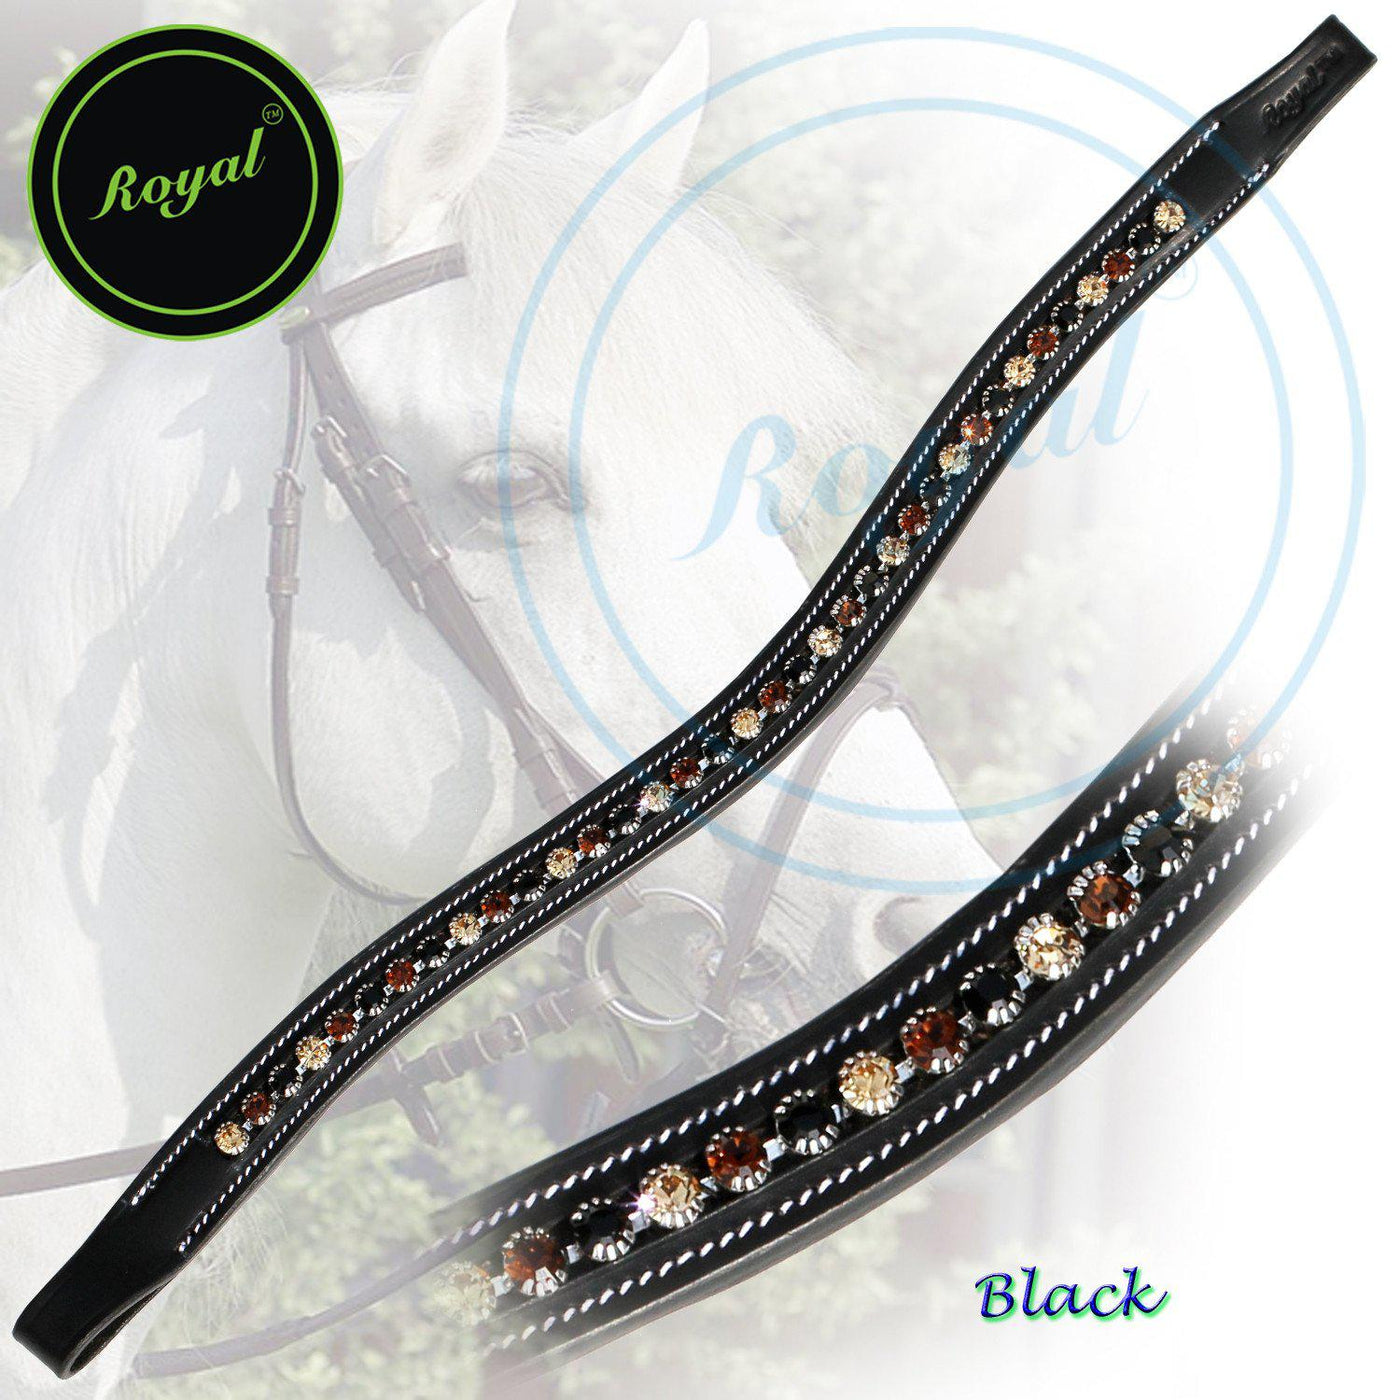 ExionPro Dual Colored Glittering Brown, Black and Golden Crystal Browband